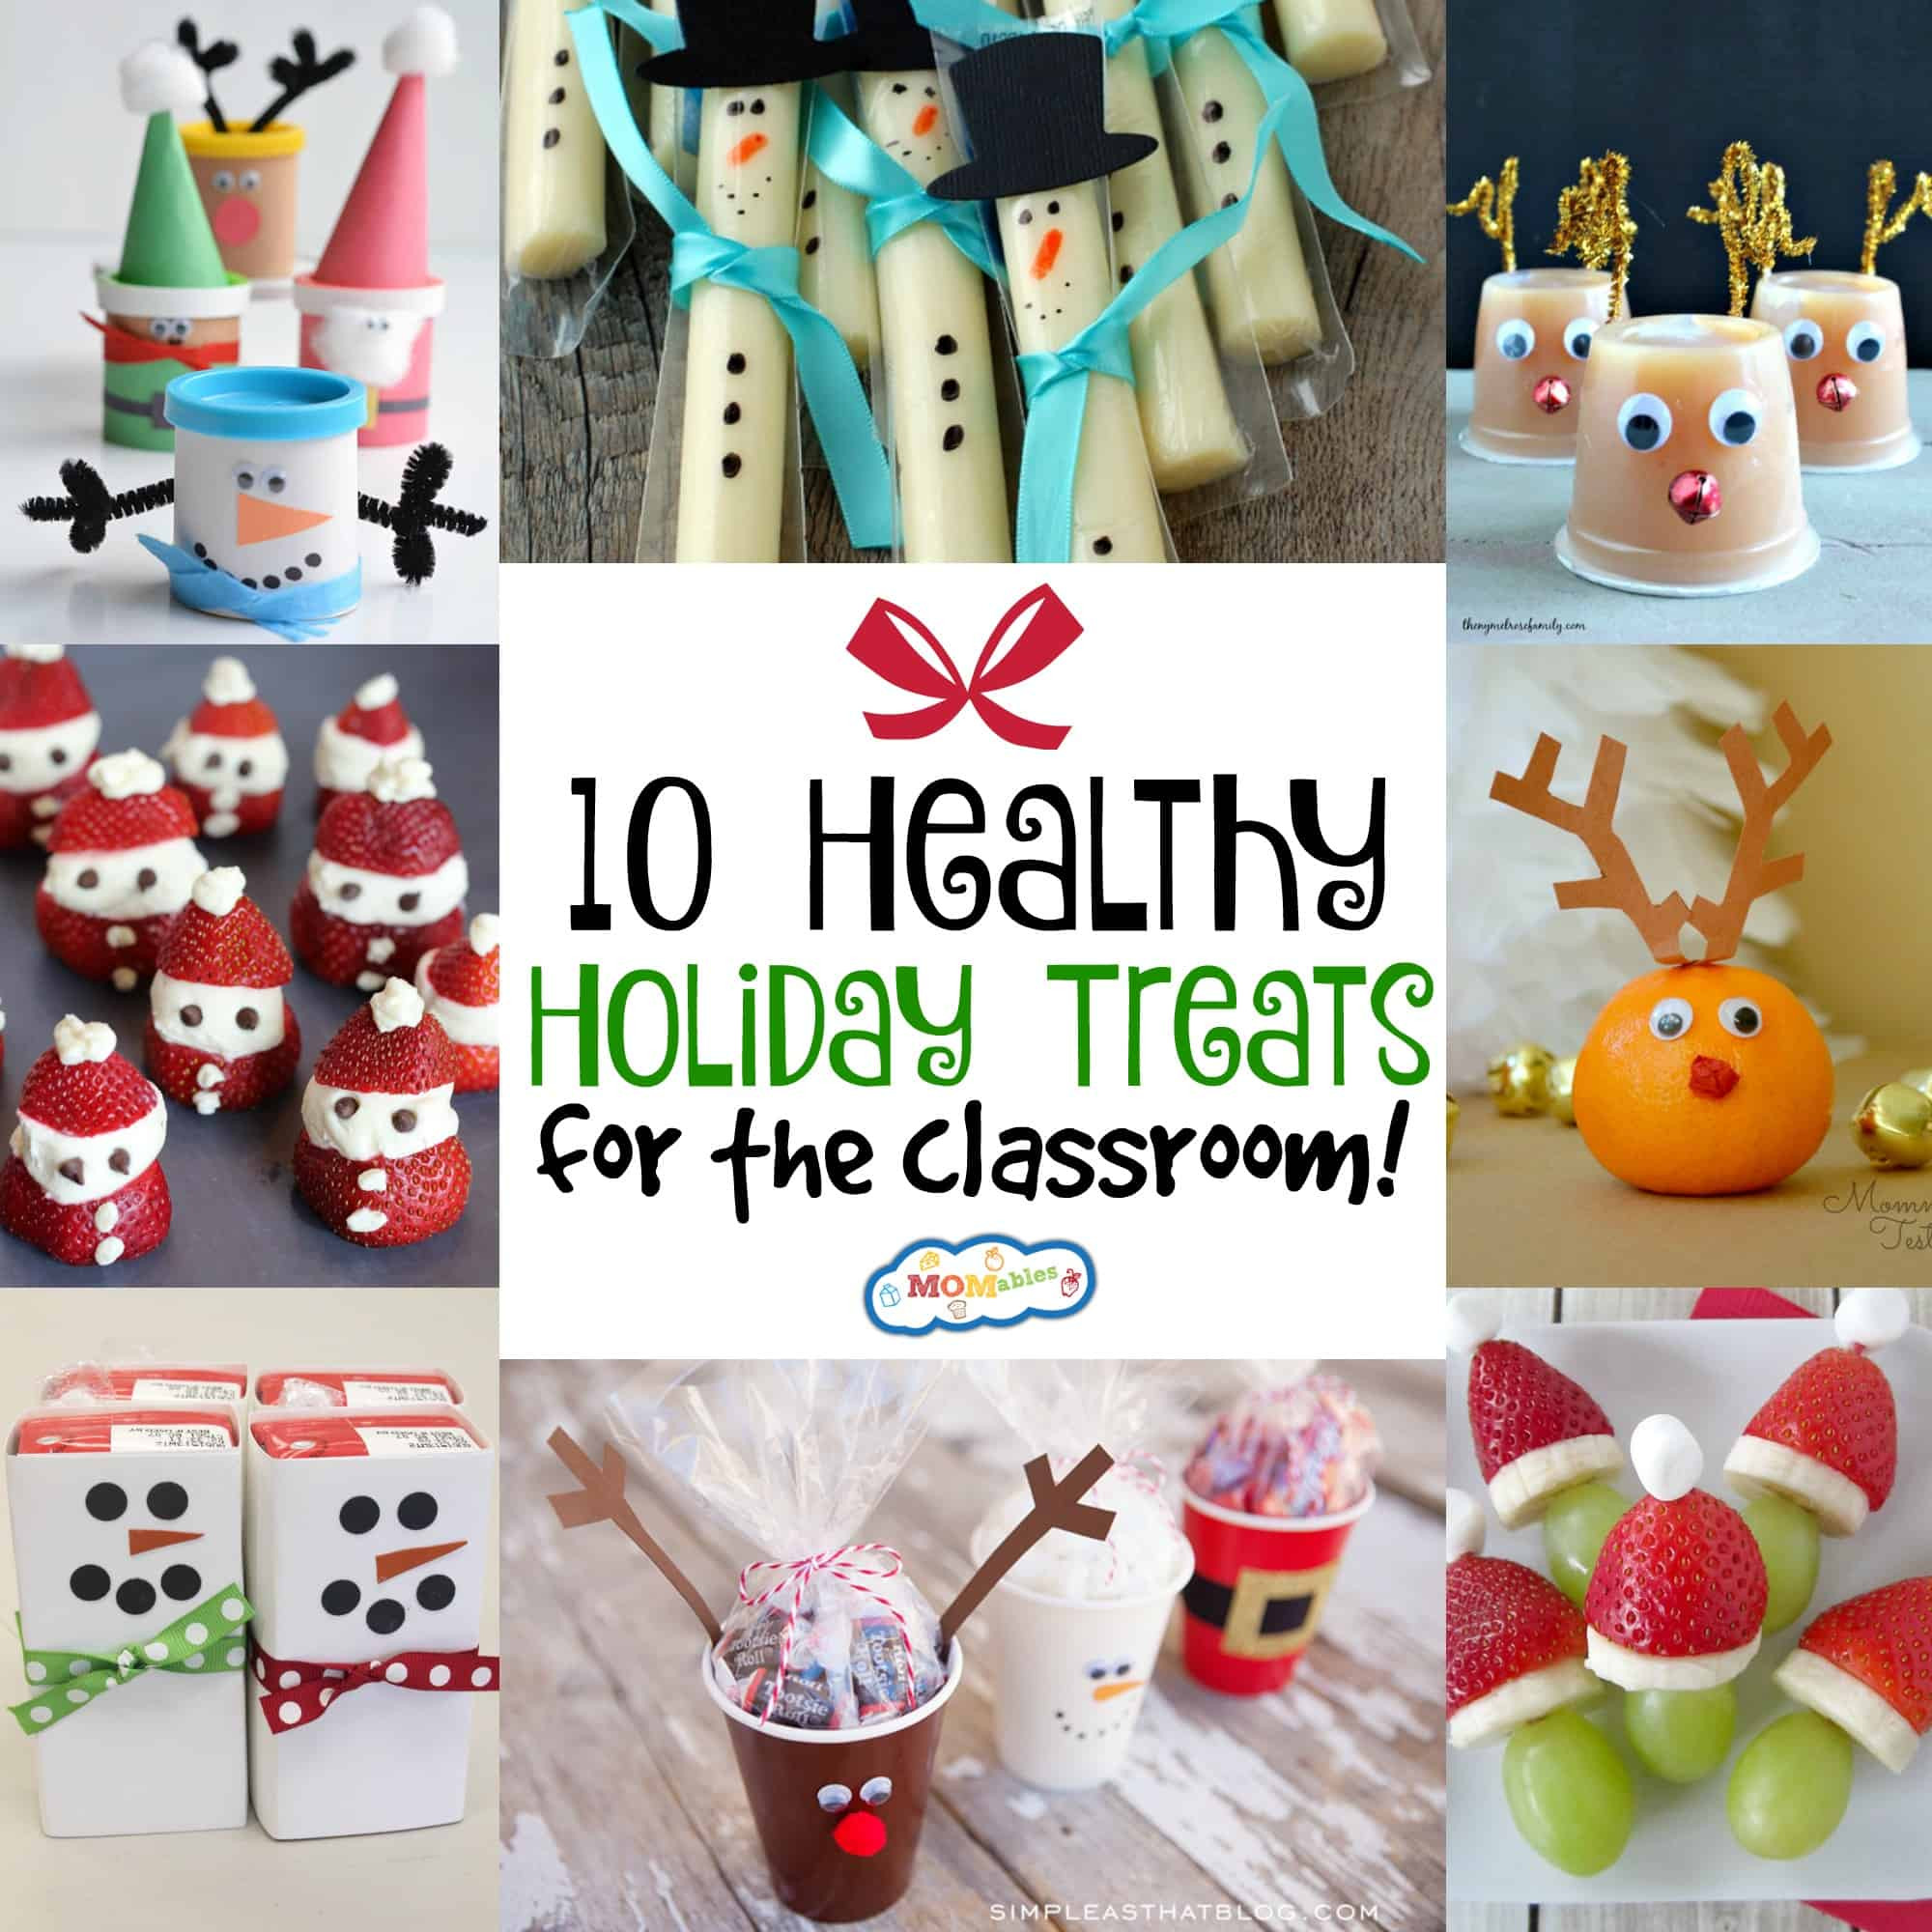 Kindergarten Holiday Party Ideas
 10 Healthy Holiday Treats for the Classroom MOMables